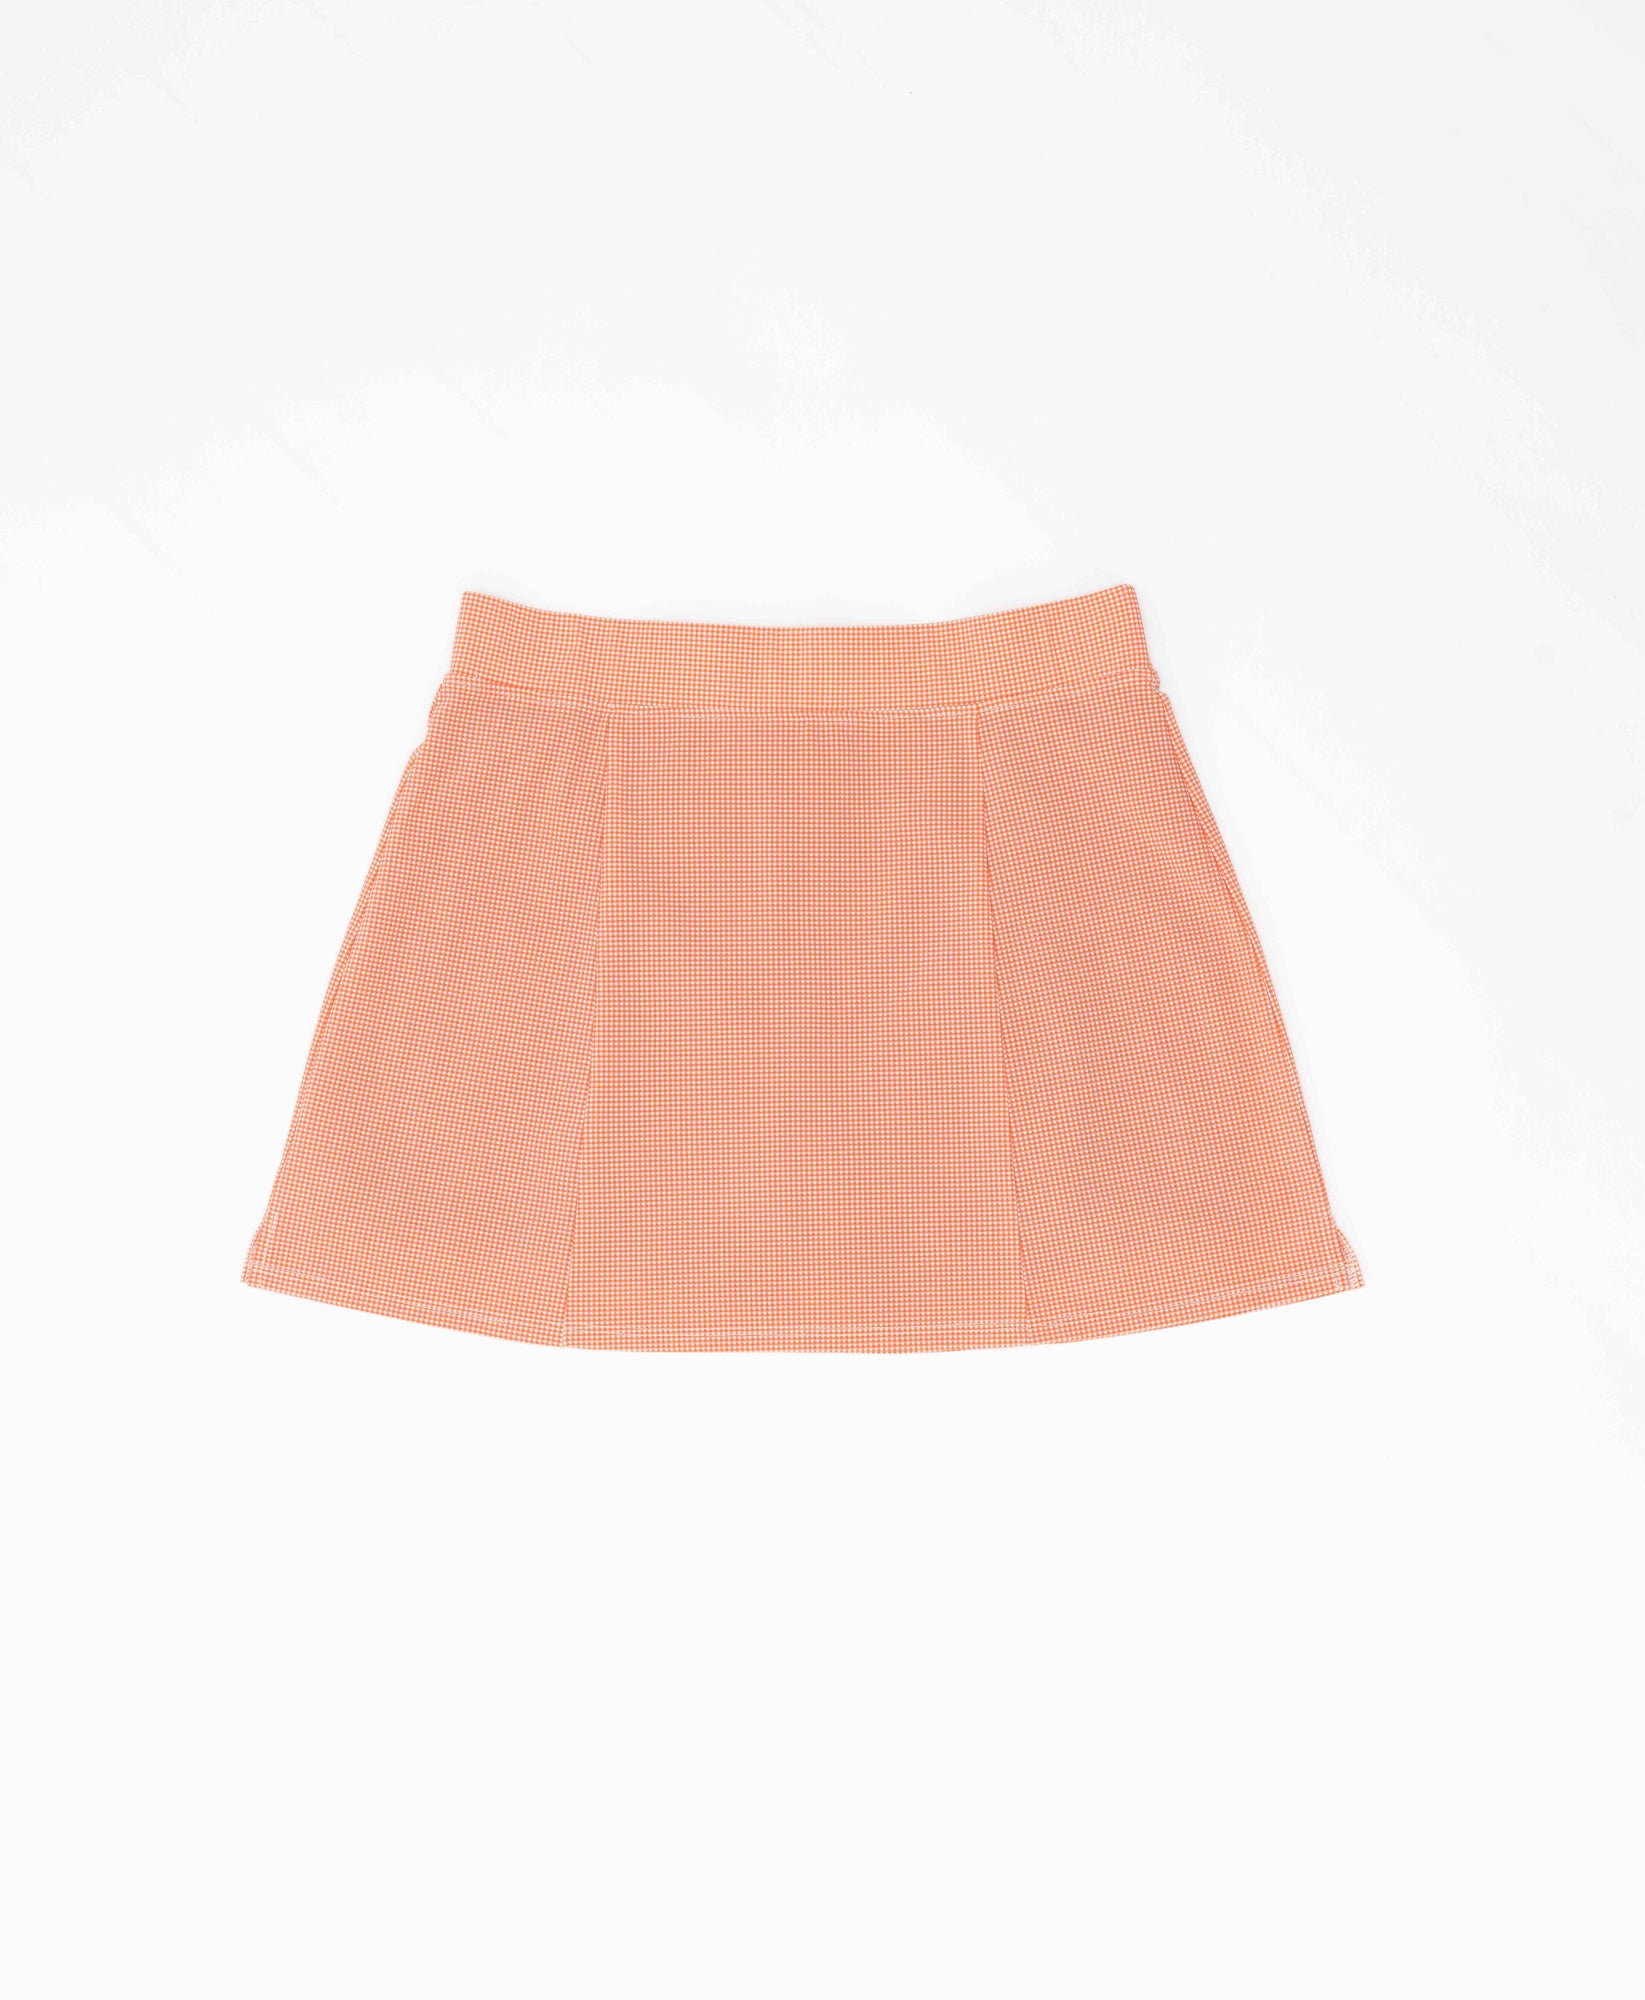 Wear One's At Simple Skort in Clay Pink Flat Back